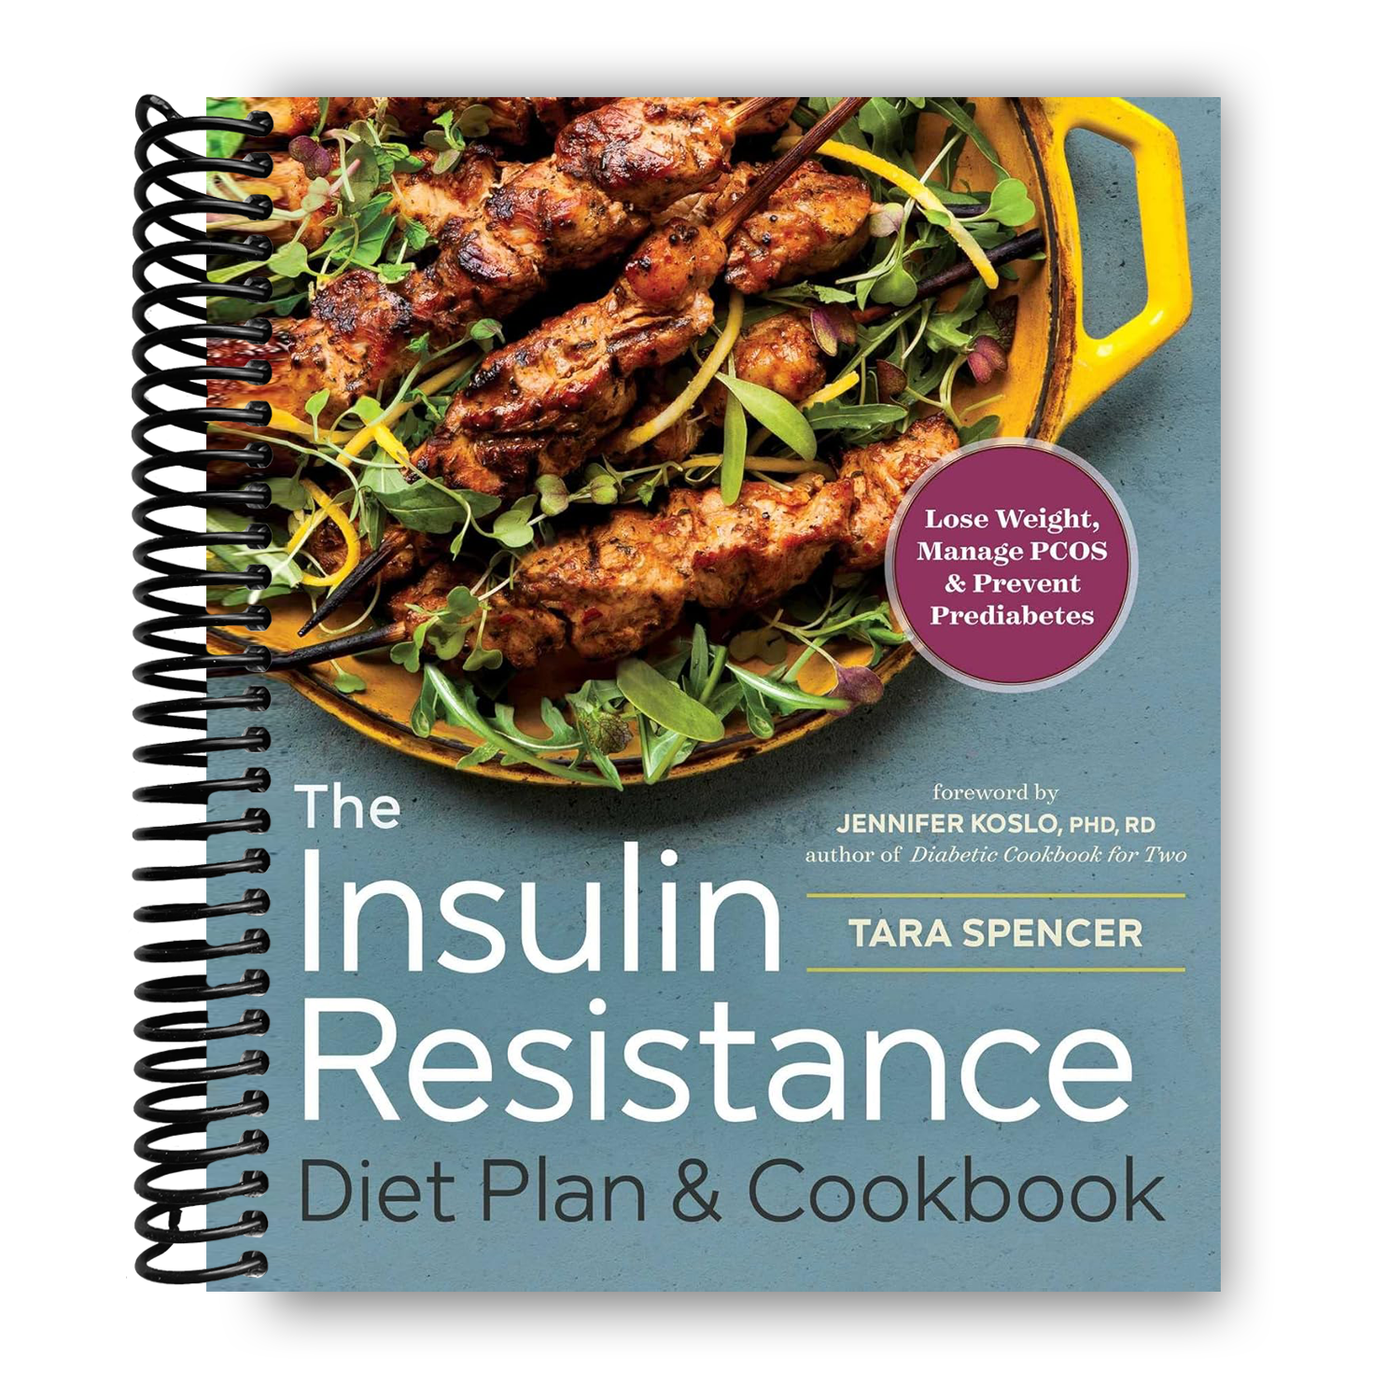 The Insulin Resistance Diet Plan & Cookbook: Lose Weight, Manage PCOS, and Prevent Prediabetes (Spiral Bound)